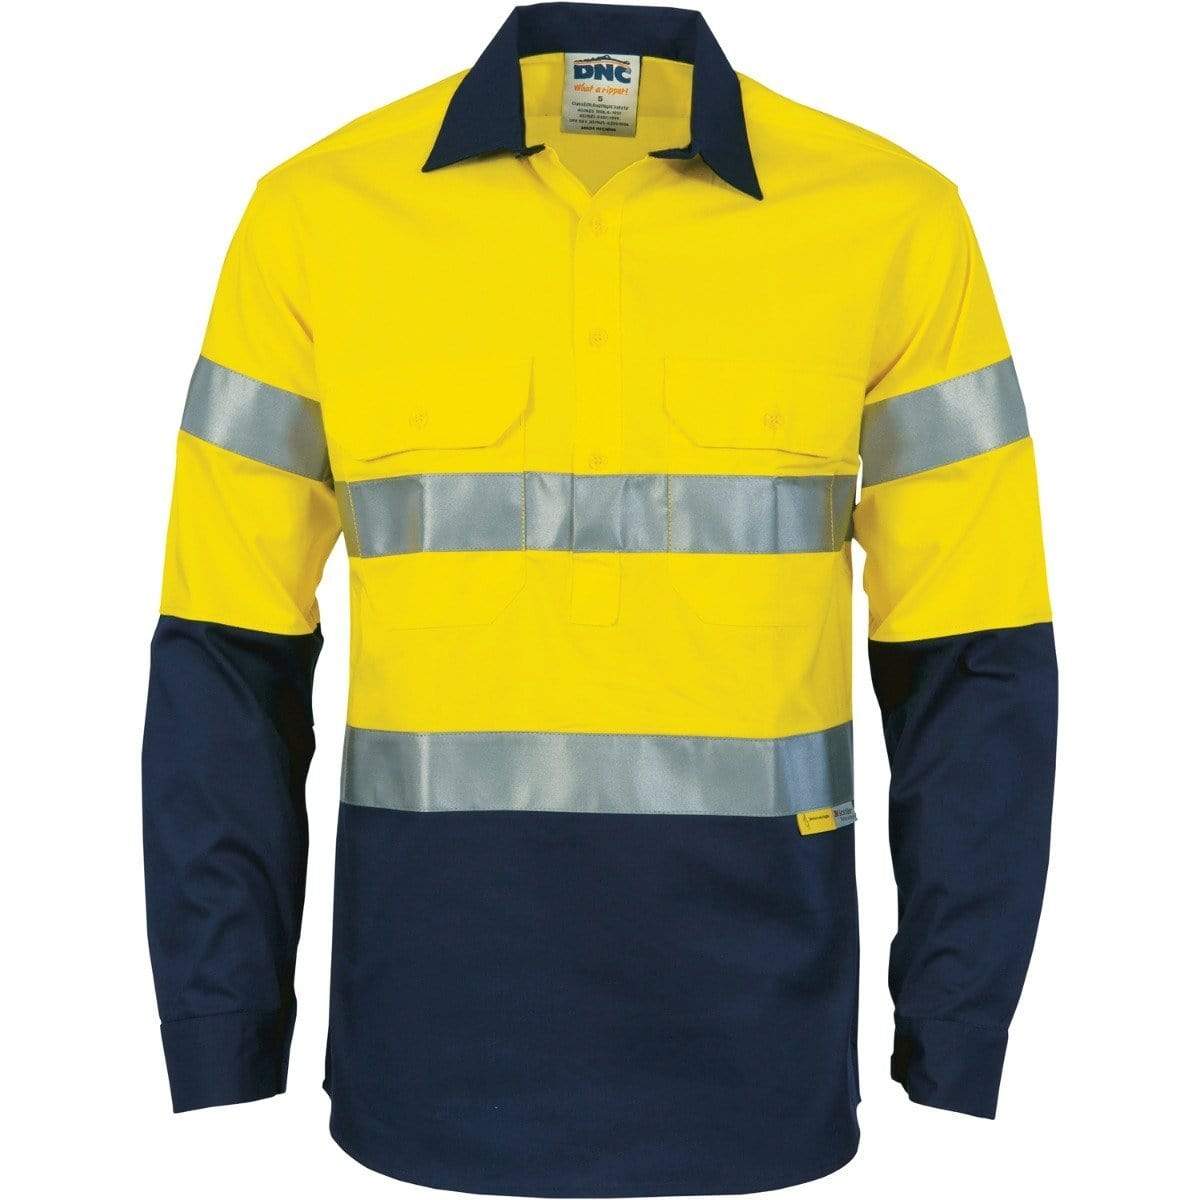 DNC Workwear Work Wear Yellow/Navy / 2XL DNC WORKWEAR Hi-Vis Two-Tone Closed Front Cotton Shirt with 3M R/Tape 3849